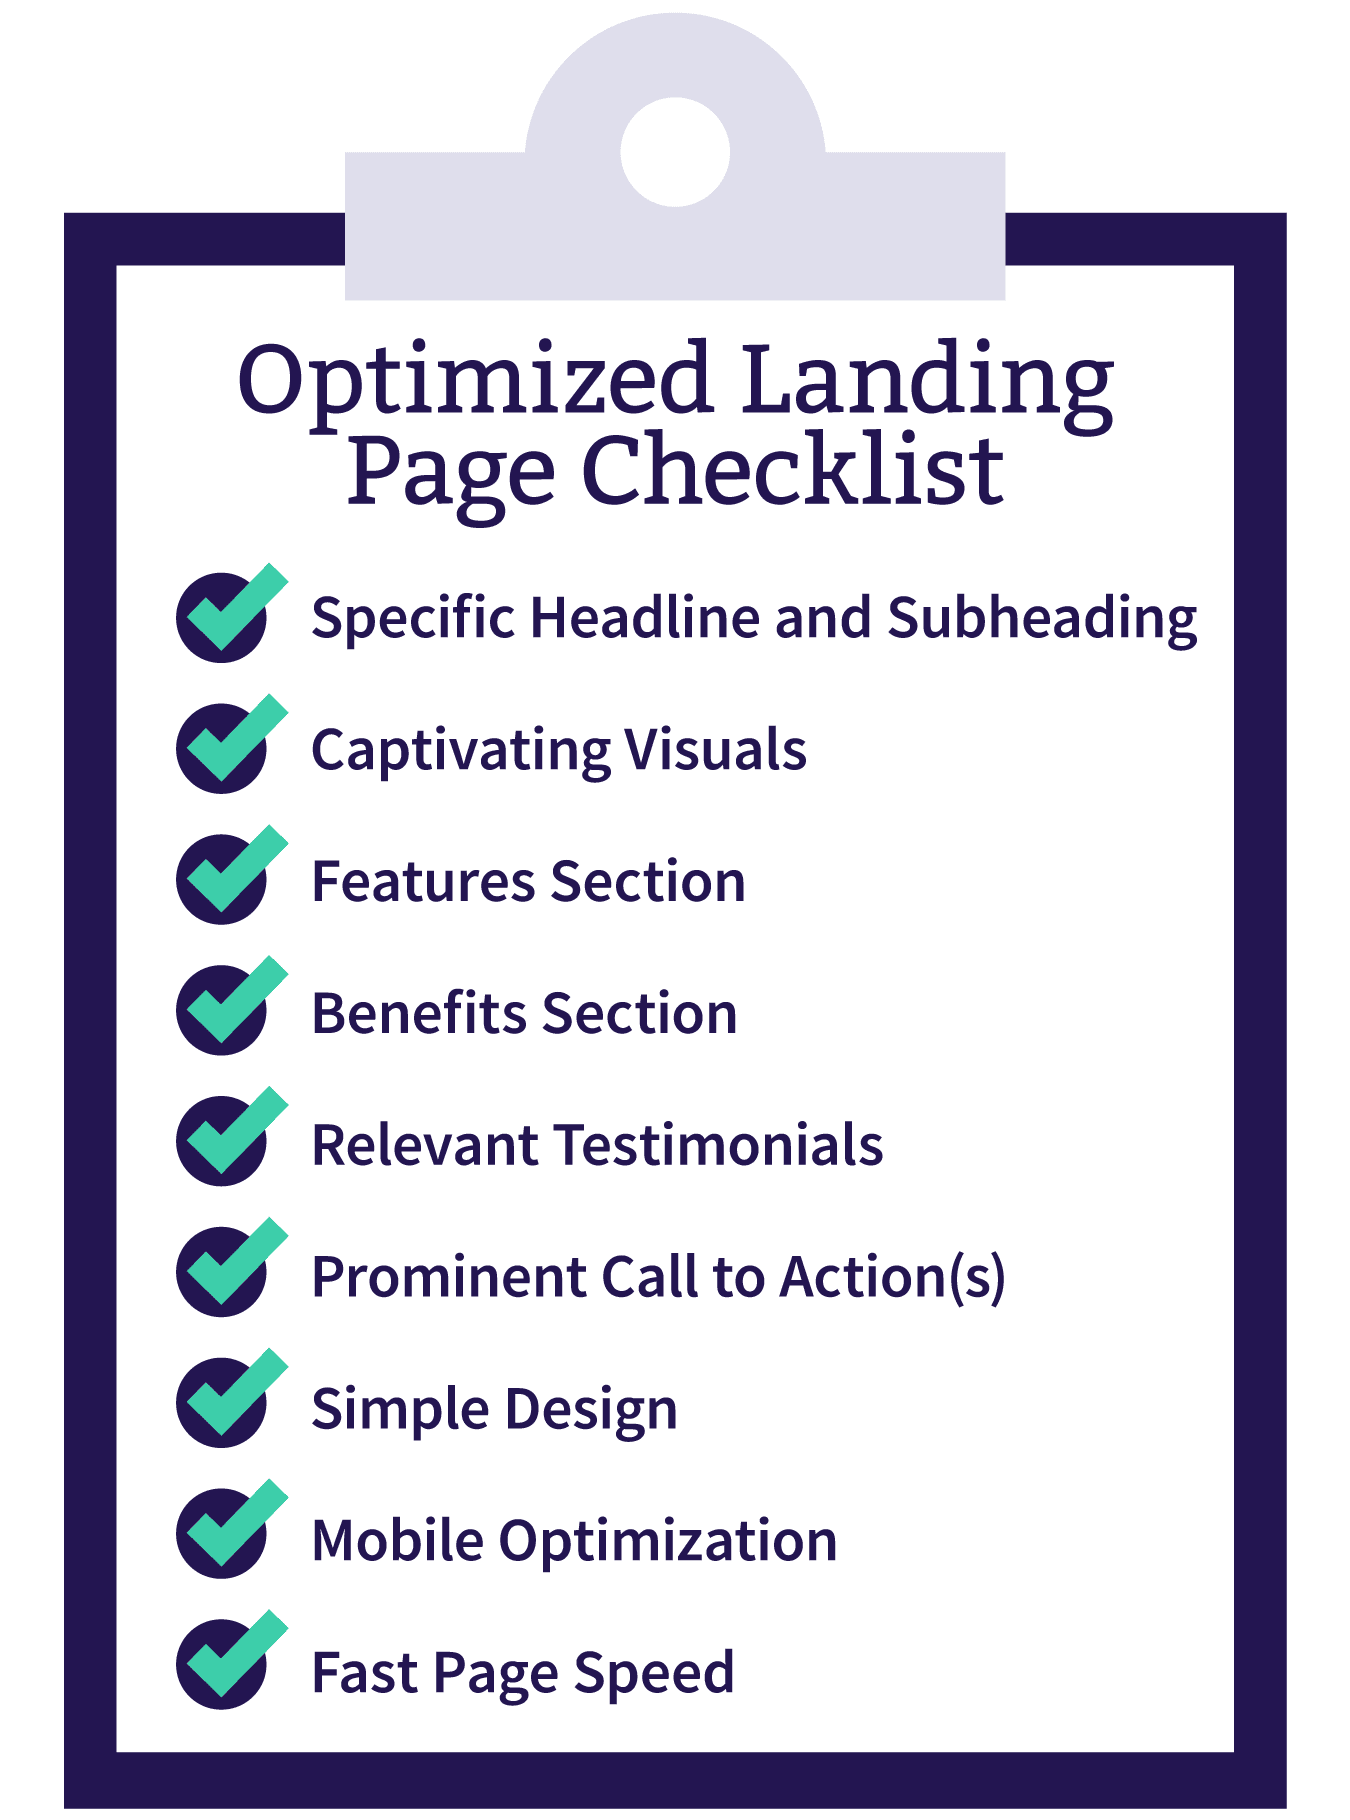 A checklist demonstrates everything a landing page needs